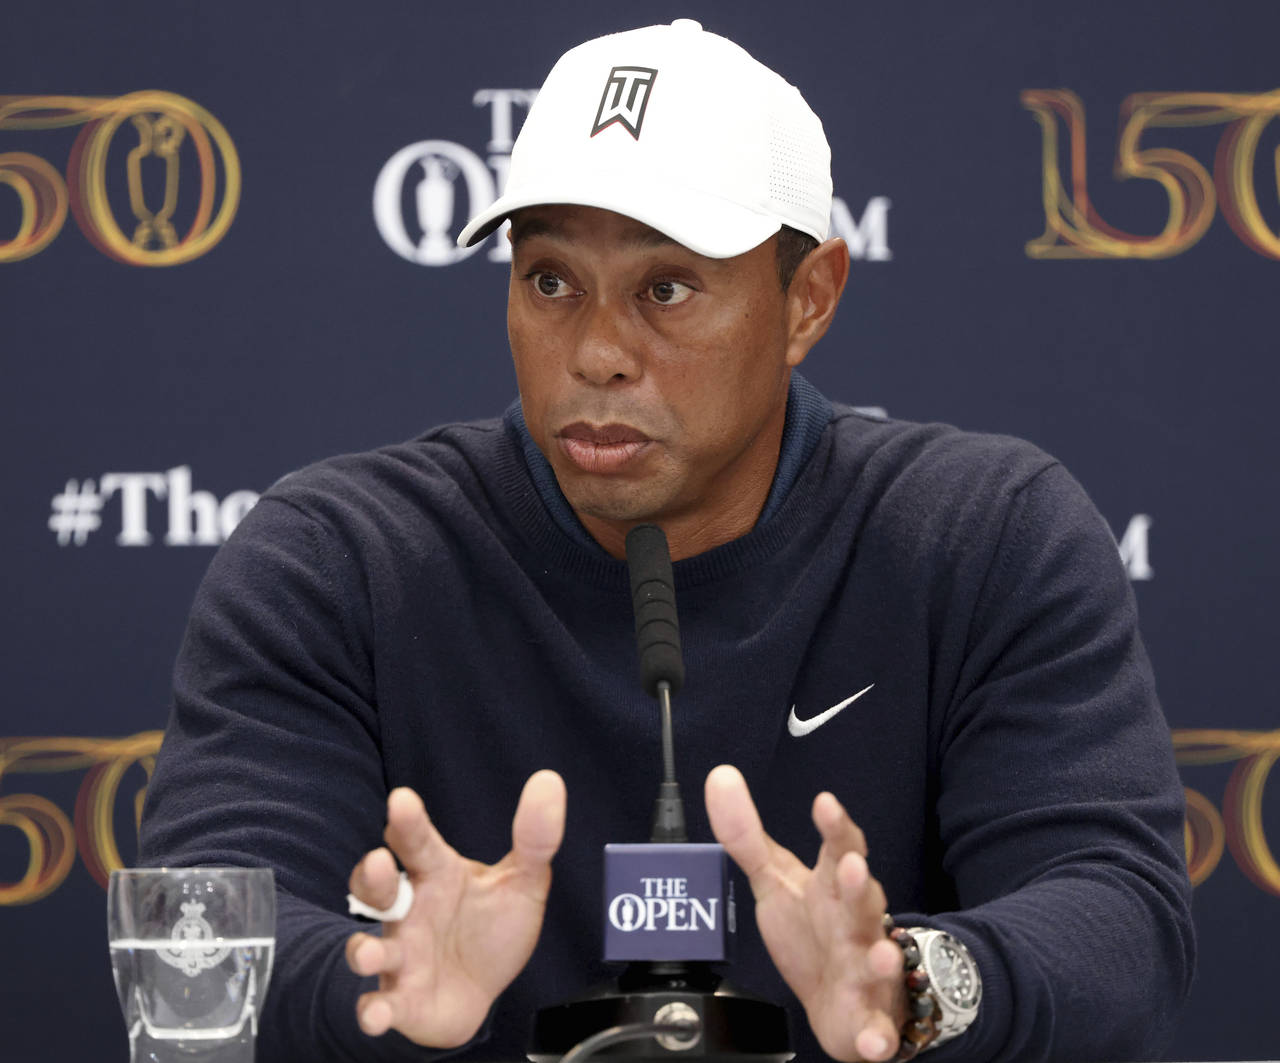 US golfer Tiger Woods speaks during a press conference at the British Open golf championship in St ...